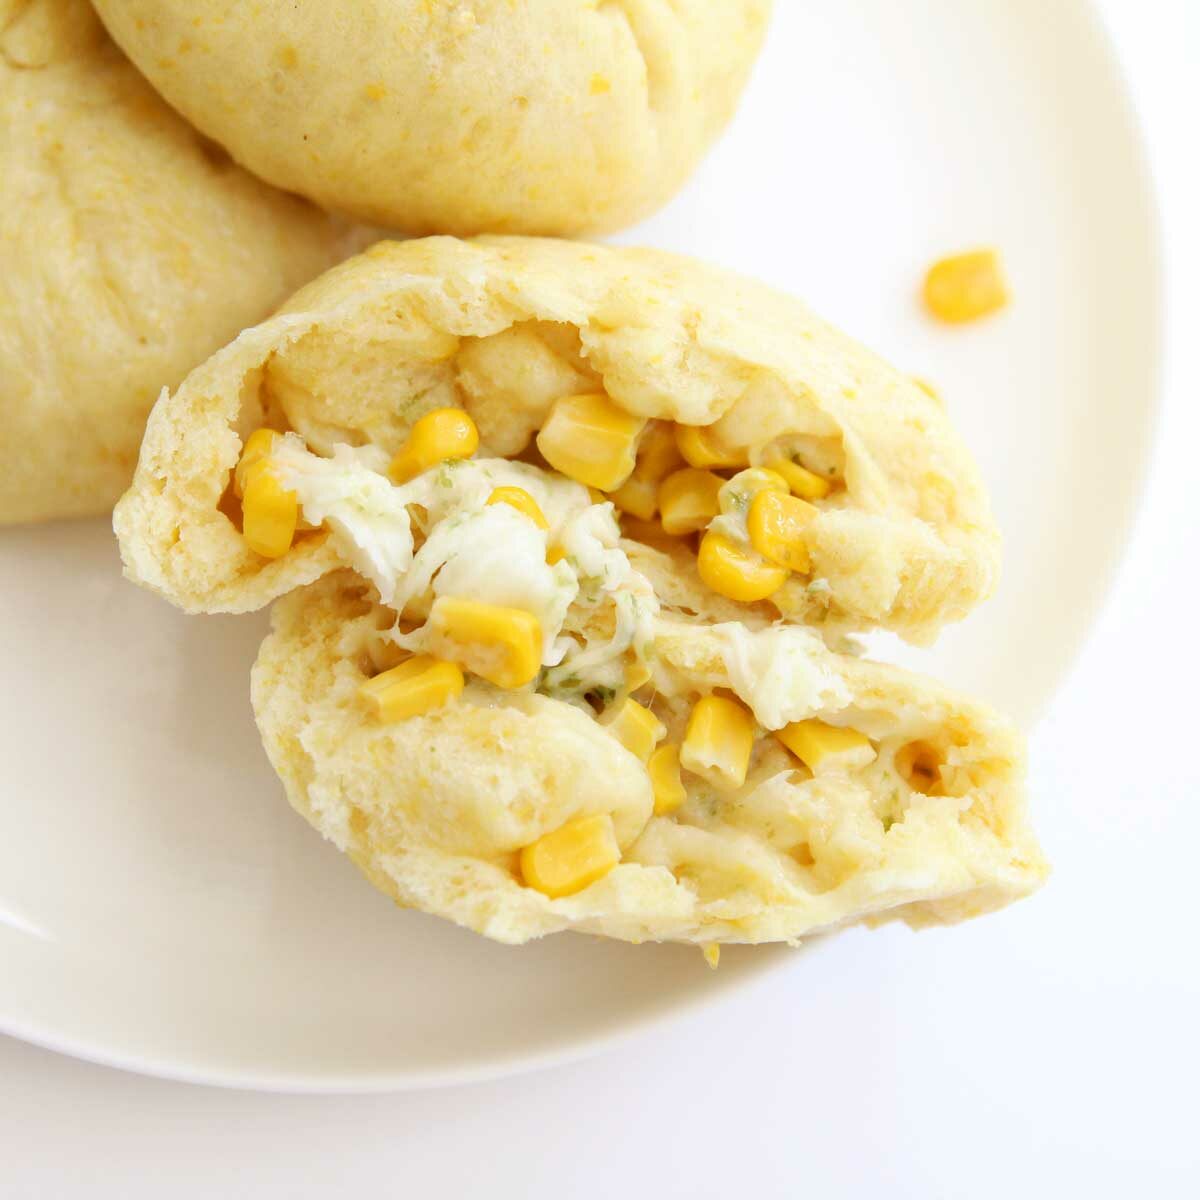 Savory Cornbread Steamed Buns with a Korean Cheese Corn Filling